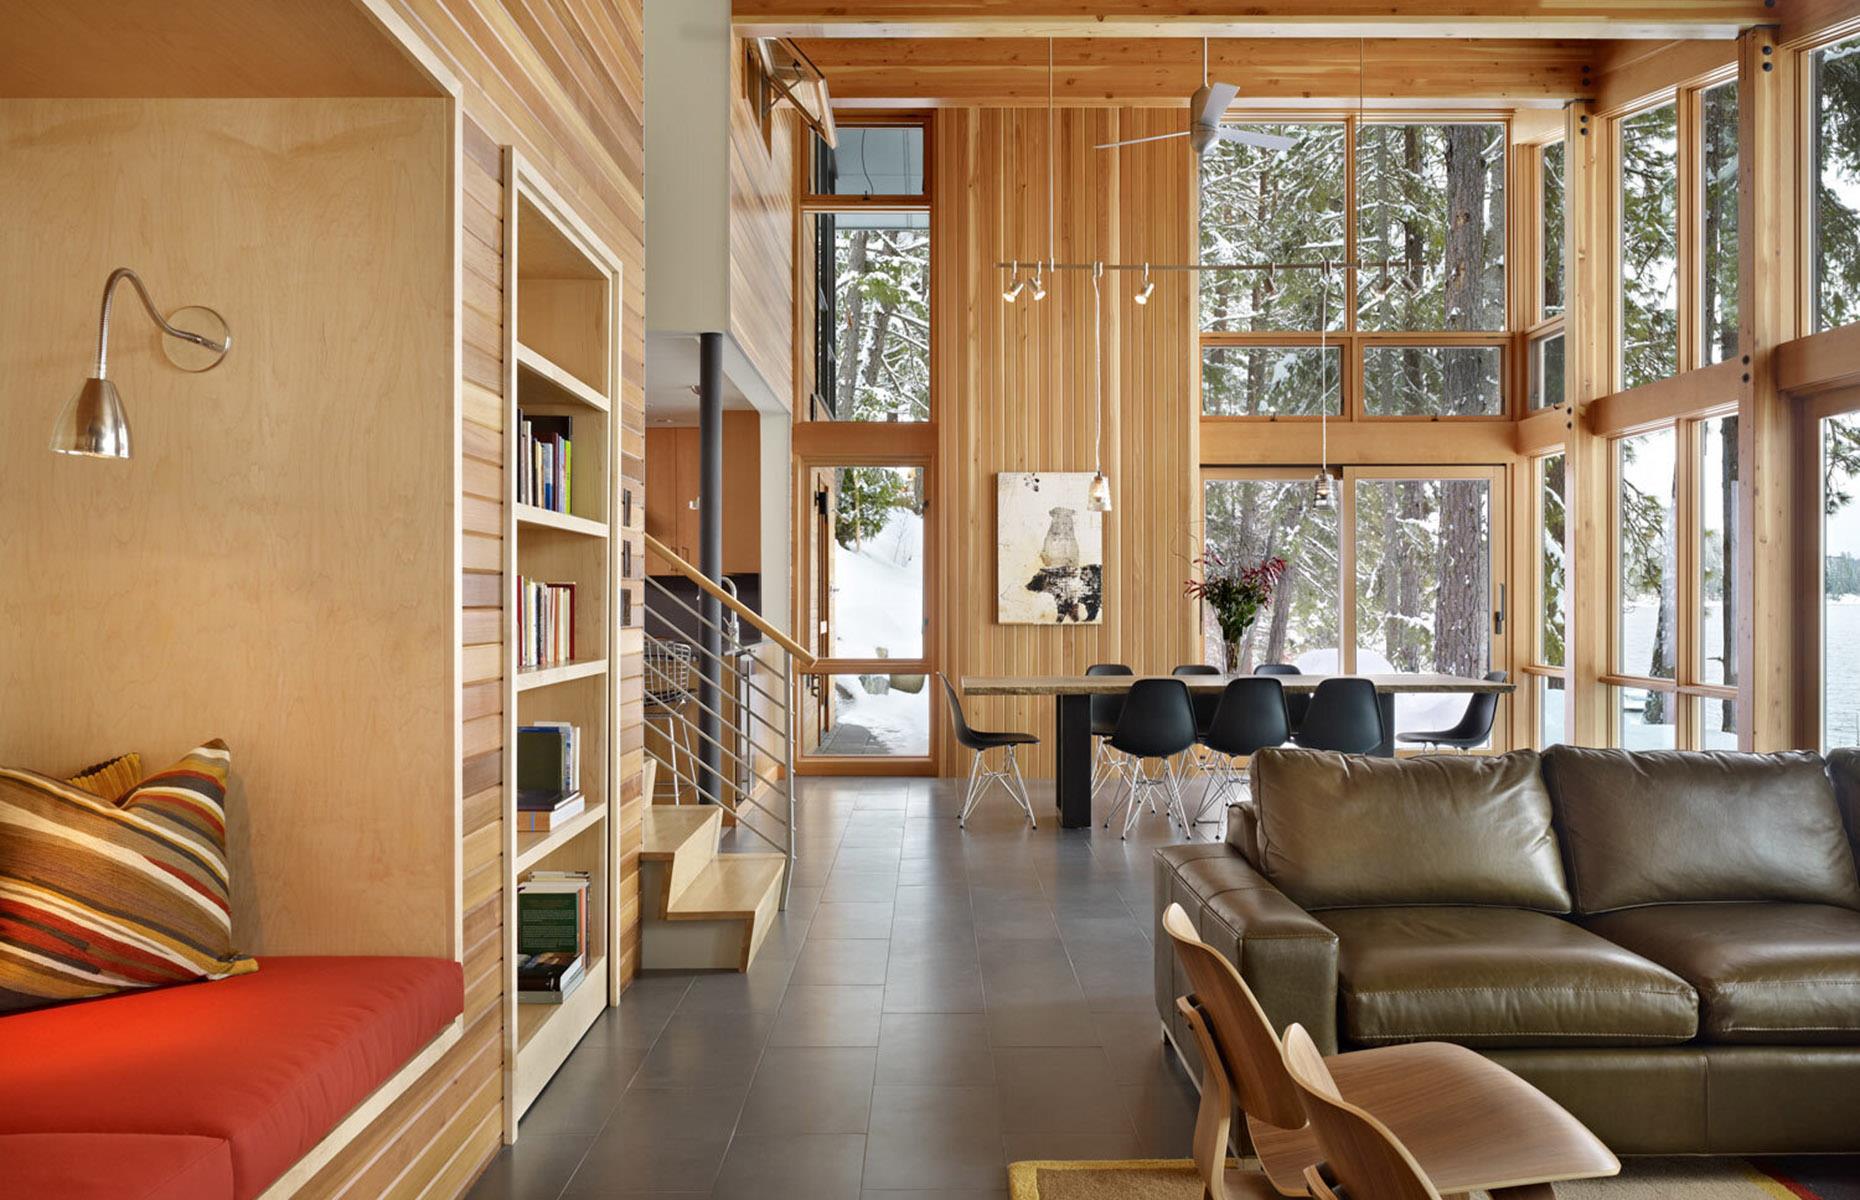 <p>This rustic yet modern living room looks just like any luxury living space with its floor-to-ceiling windows and soaring ceilings. However, <a href="https://www.deforestarchitects.com/">DeForest Architects</a> gave the room a secret door. Can you spot it? </p>